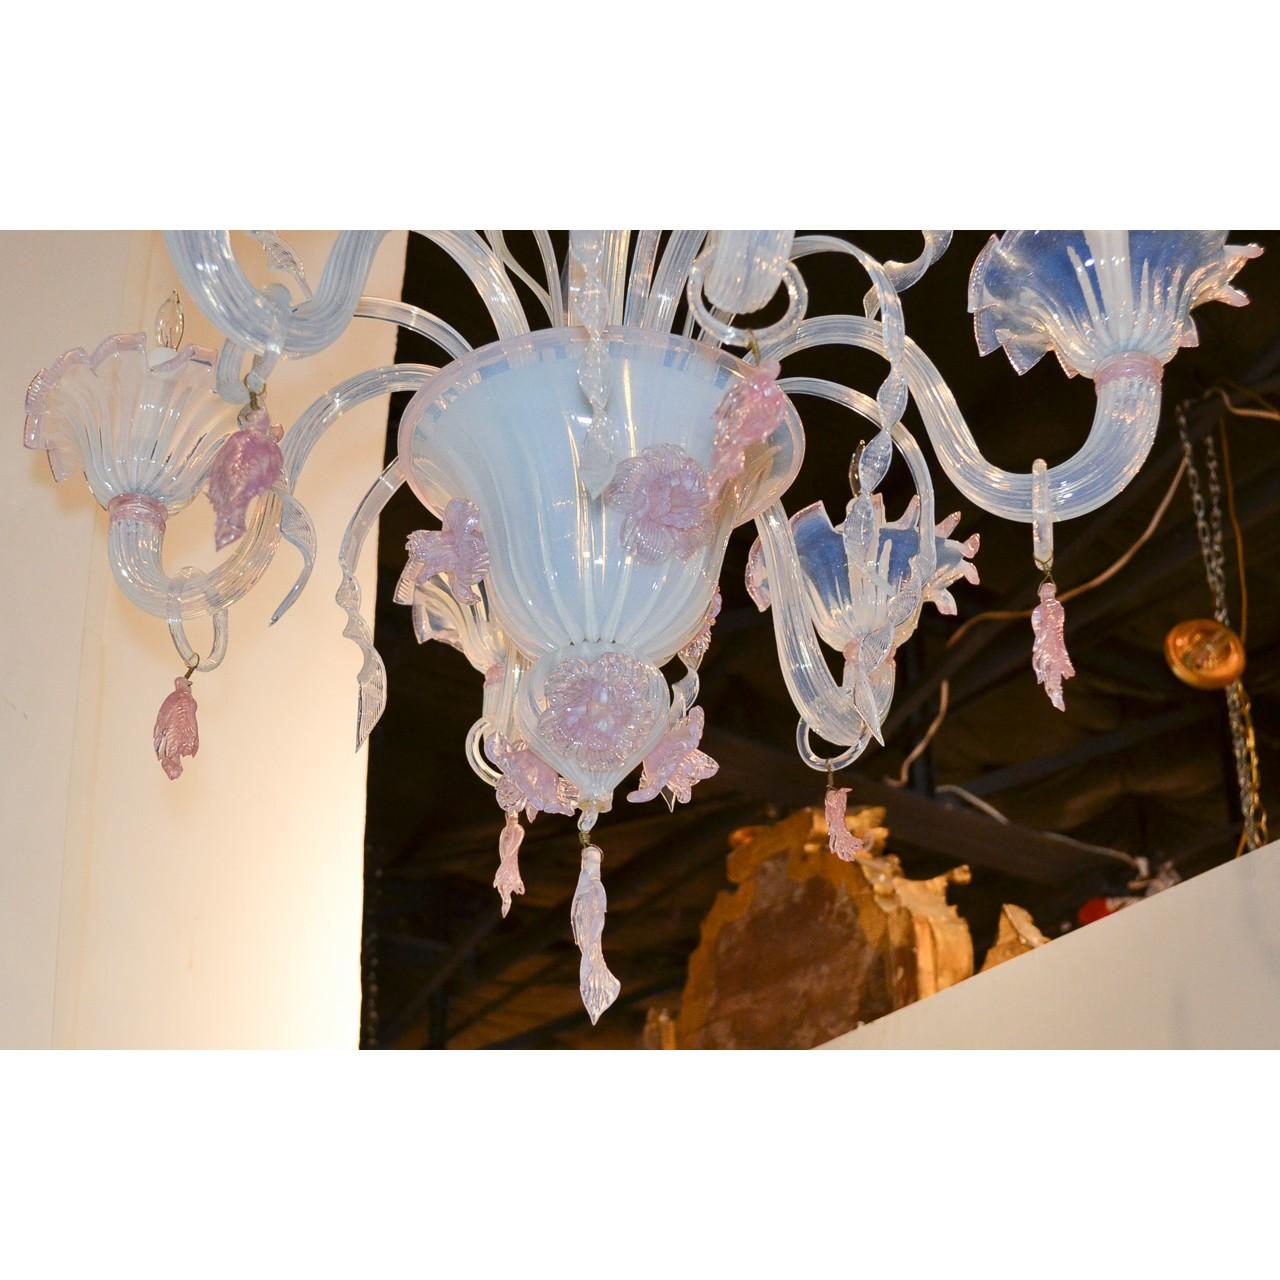 Uniquely designed antique Italian Murano blown glass opalescent chandelier in hues of pale blue and pink. The shaped stem with blossoming flowers and birds depicted in relief and enhanced with long slender leaves. Surmounted by wonderfully scrolled